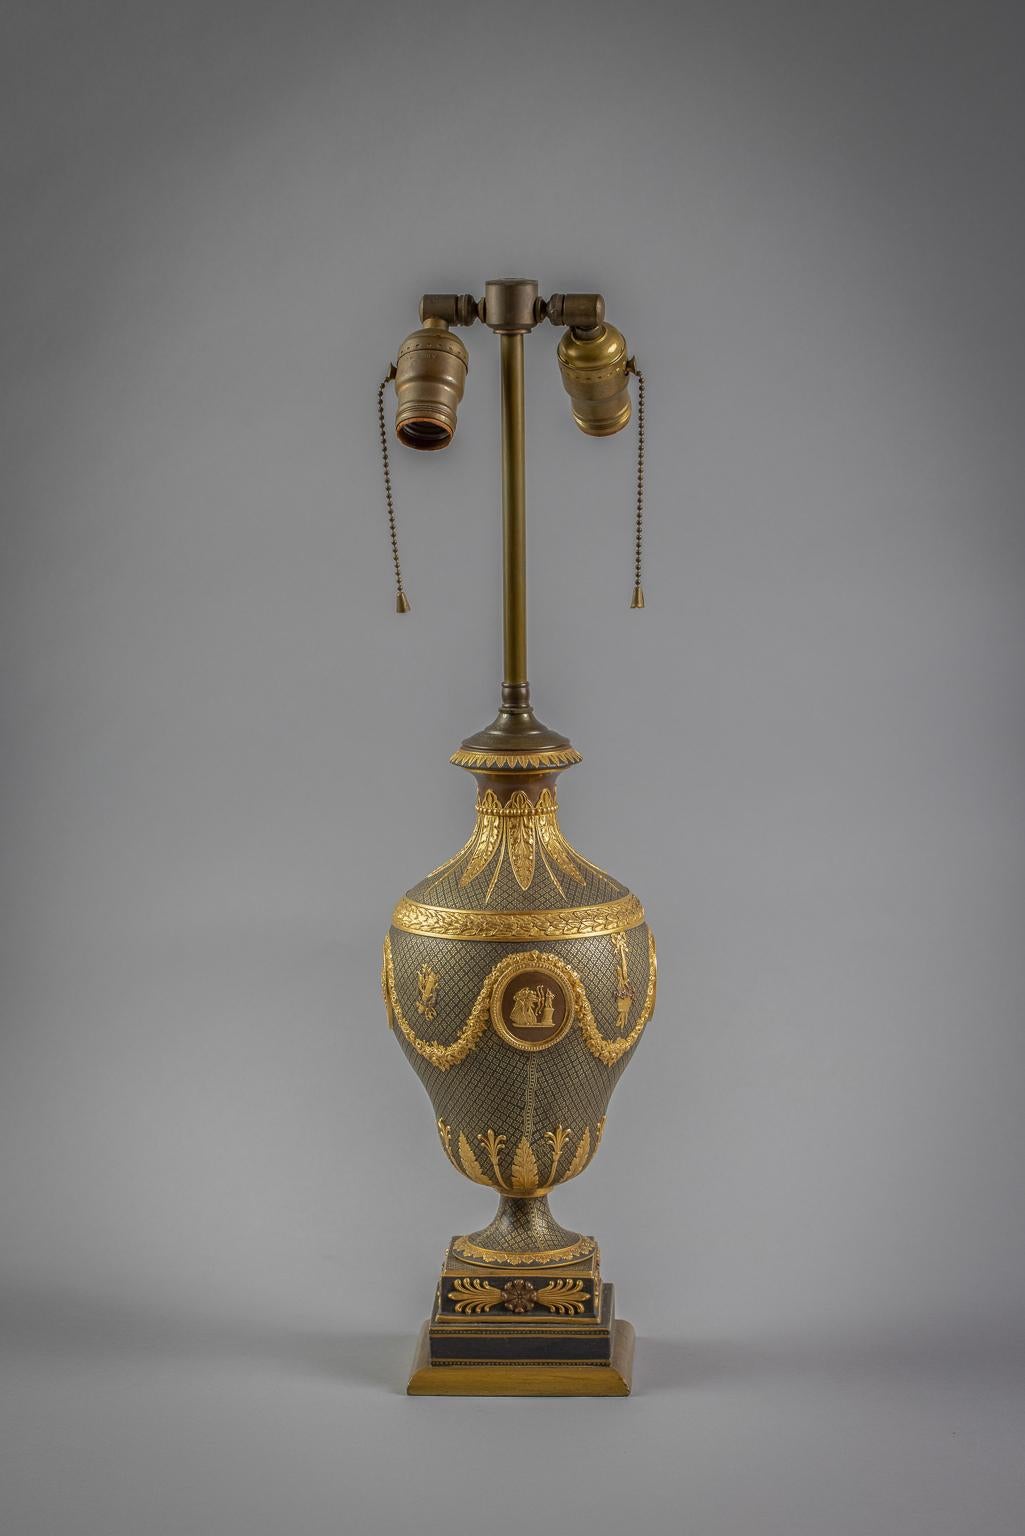 Mounted as a lamp, of ovoid form, decorated with oval medallions depicting classical figures on a gilt decorated black ground, hung with a floral garland continuing to a flared neck and removable lid, raised on a socle and ending in a square base.